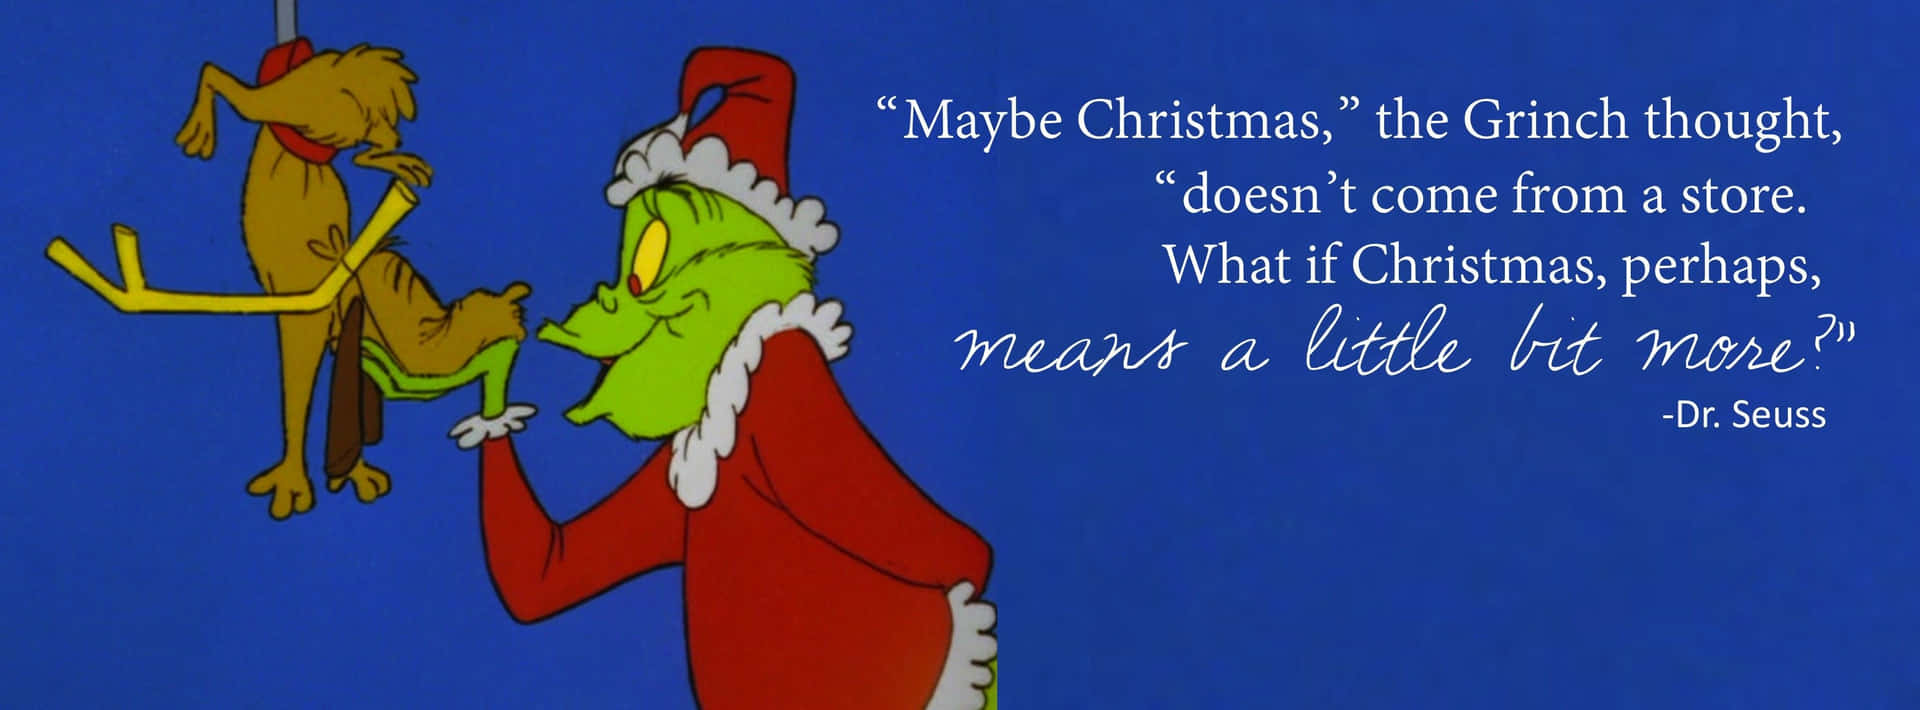 A festive look for the Christmas Grinch! Wallpaper